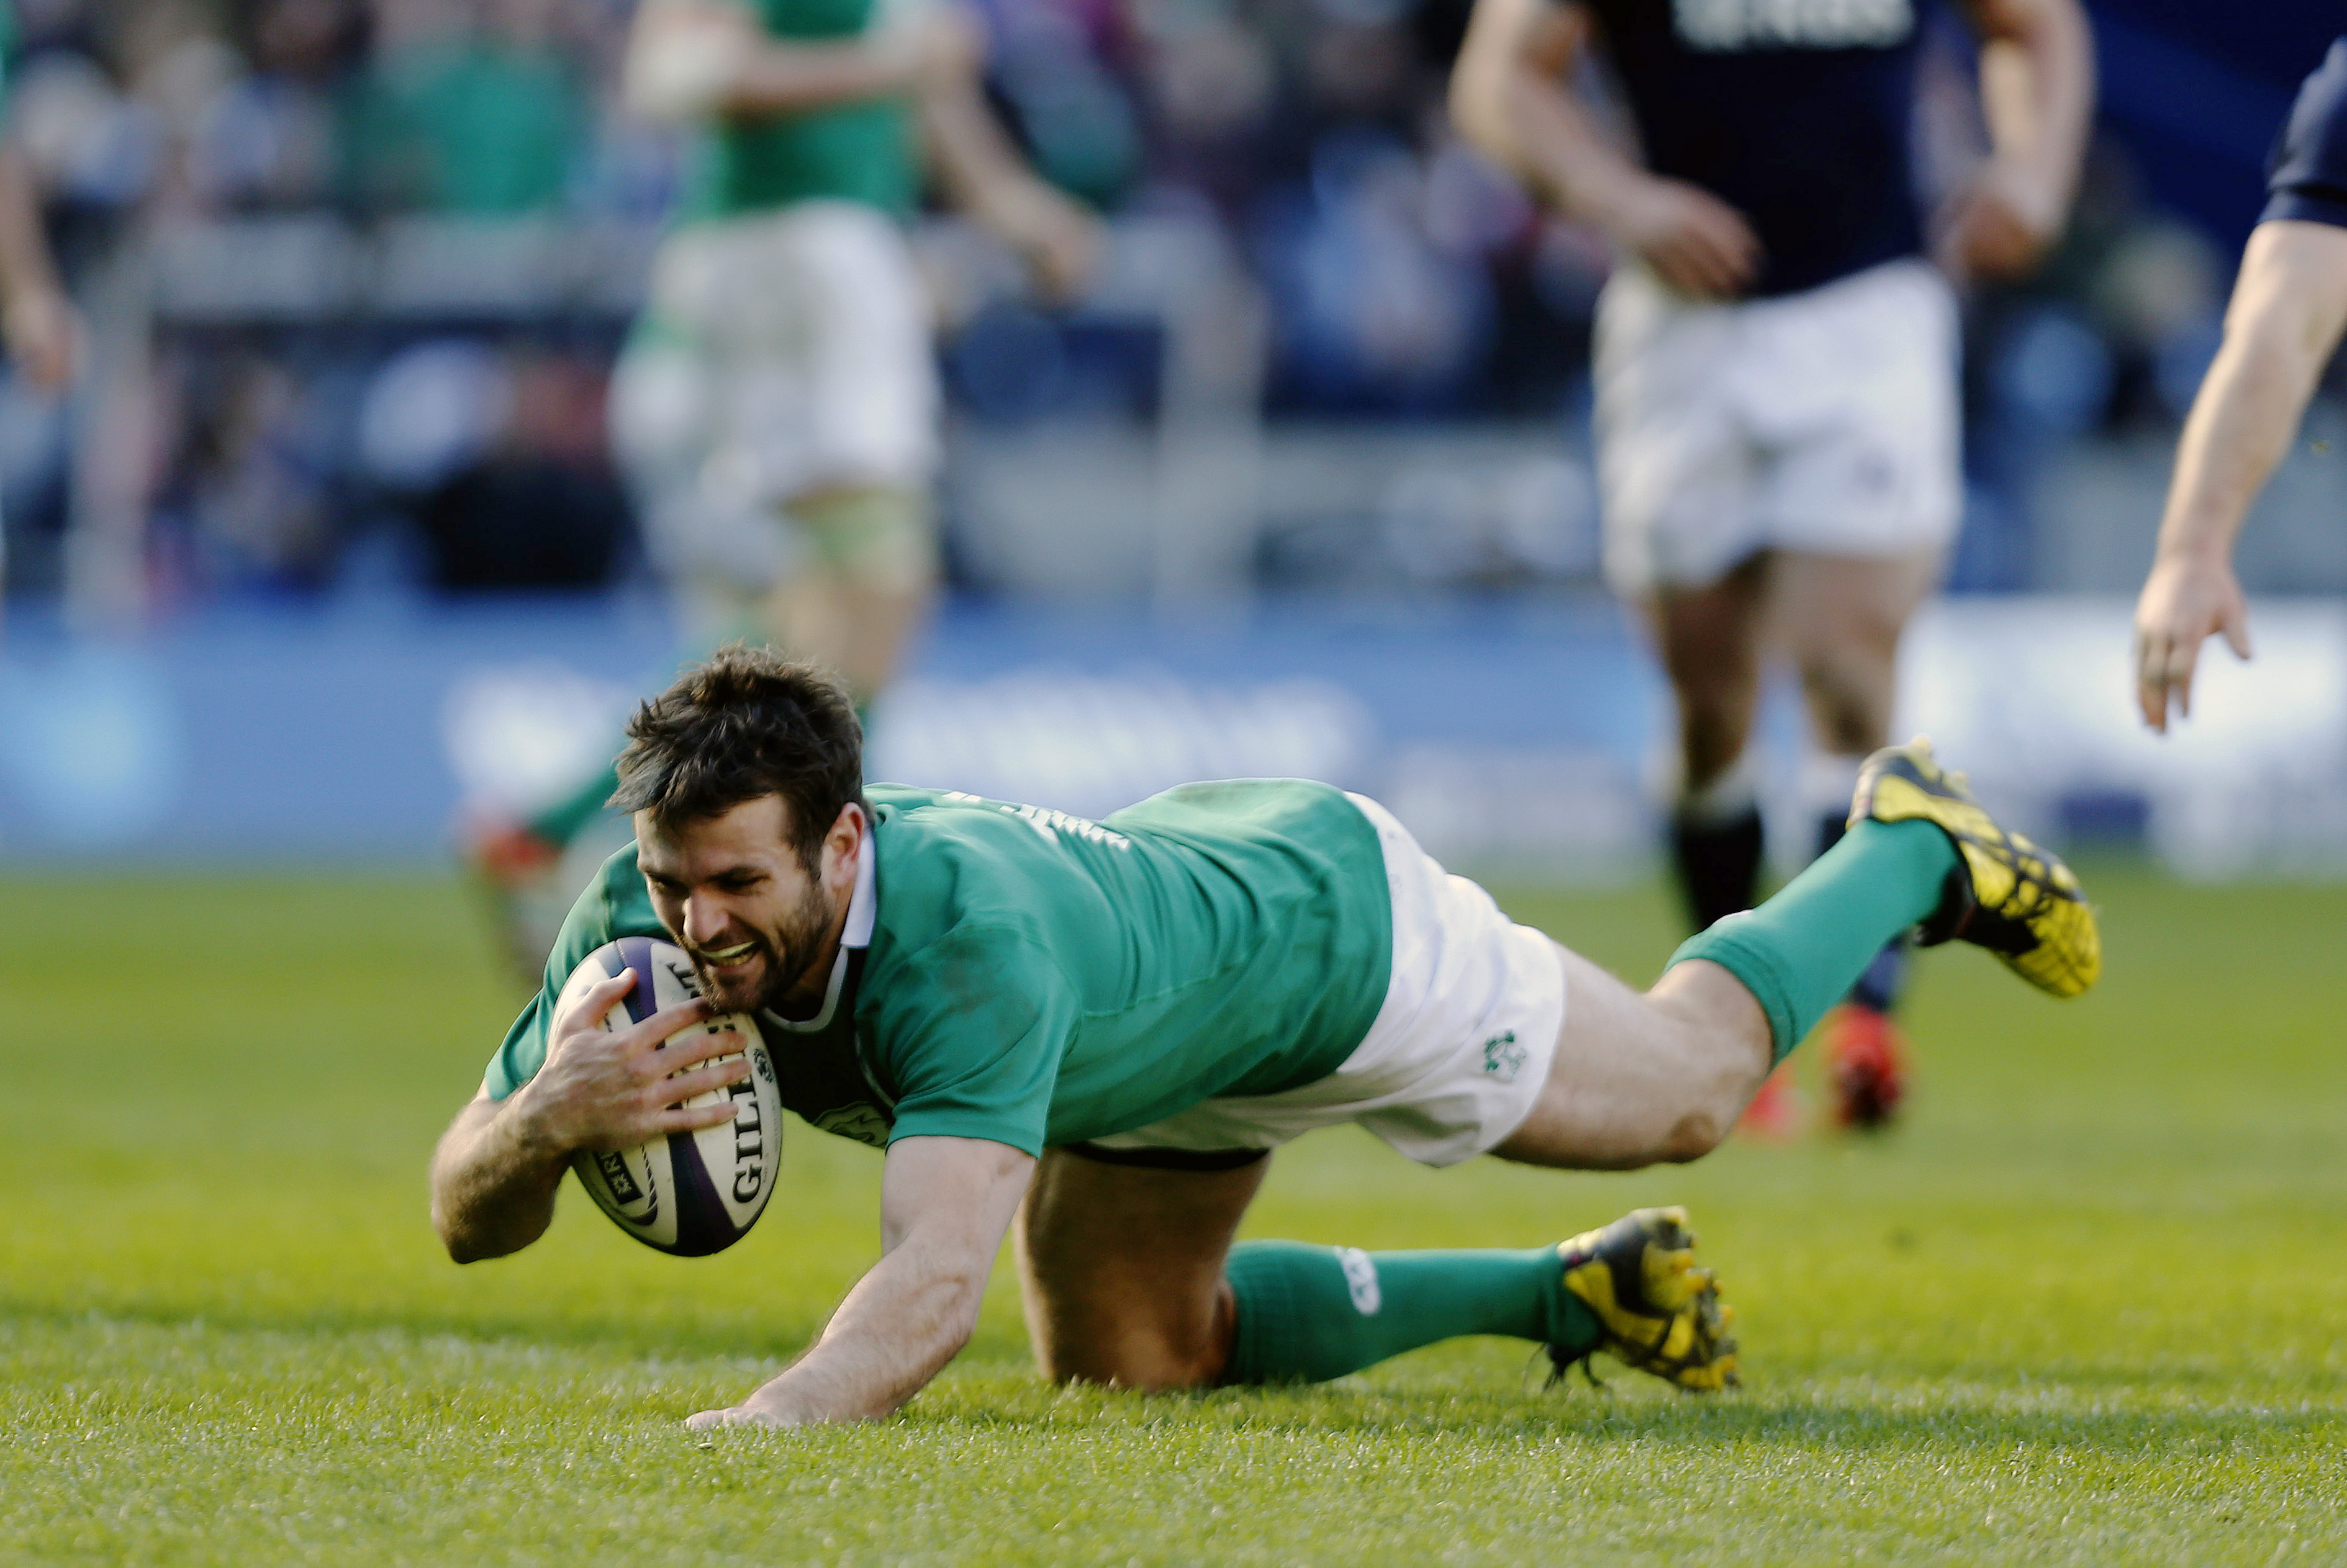 Jared Payne scores Ireland's third try in a 40-10 victory over Scotland in their Six Nations clash at Murrayfield. Photo: Reuters